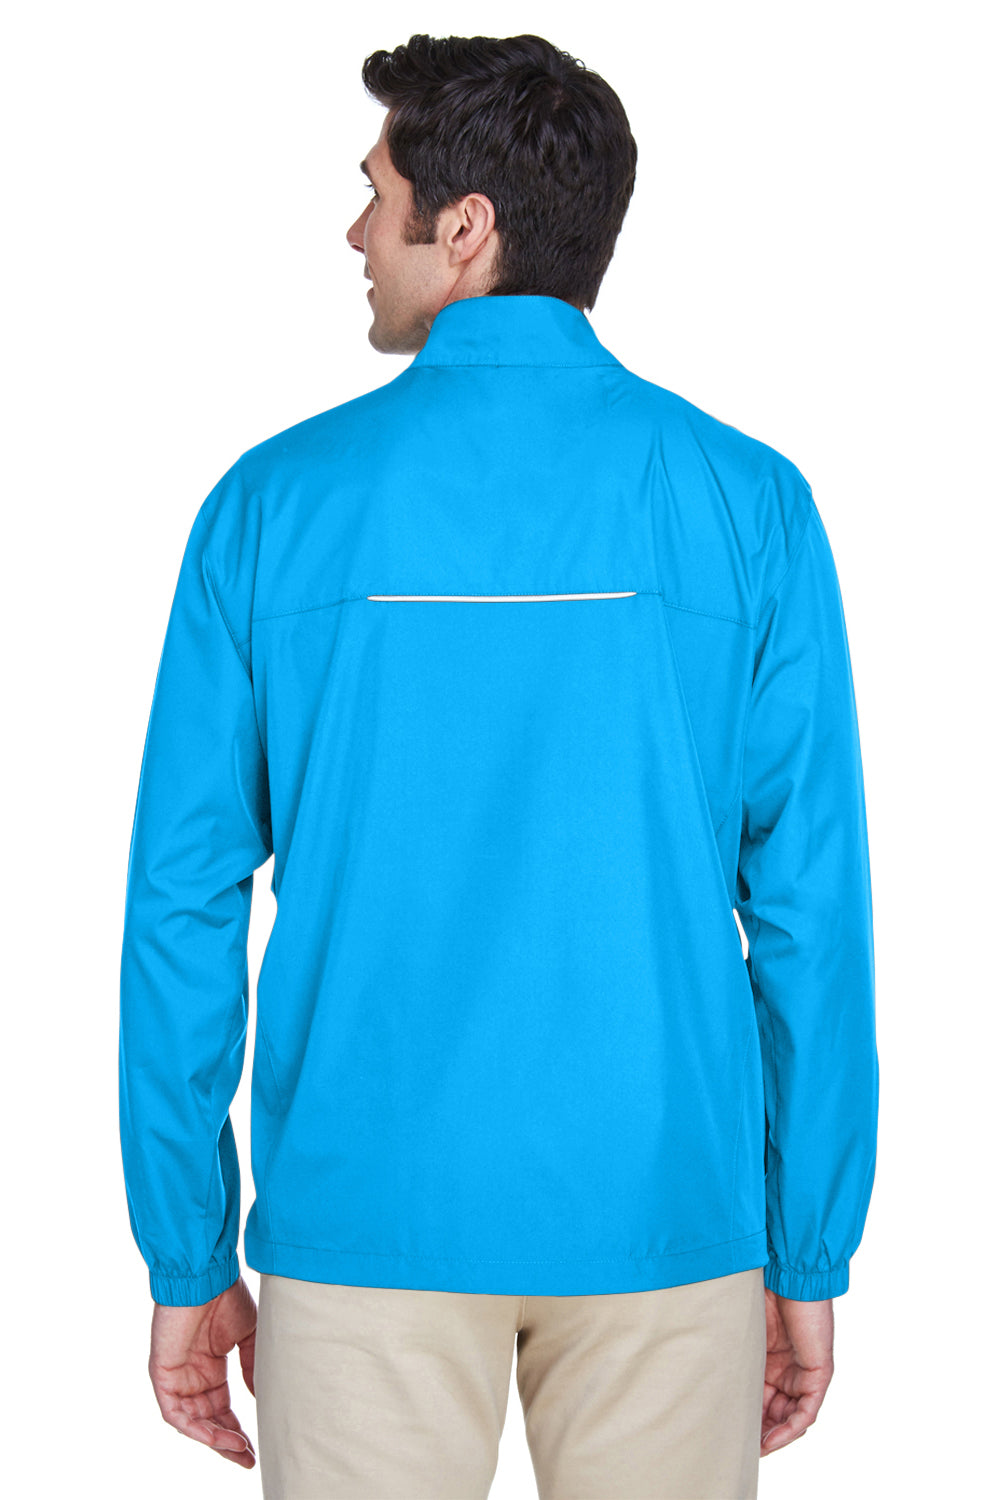 Core 365 88183 Mens Motivate Water Resistant Full Zip Jacket Electric Blue Back